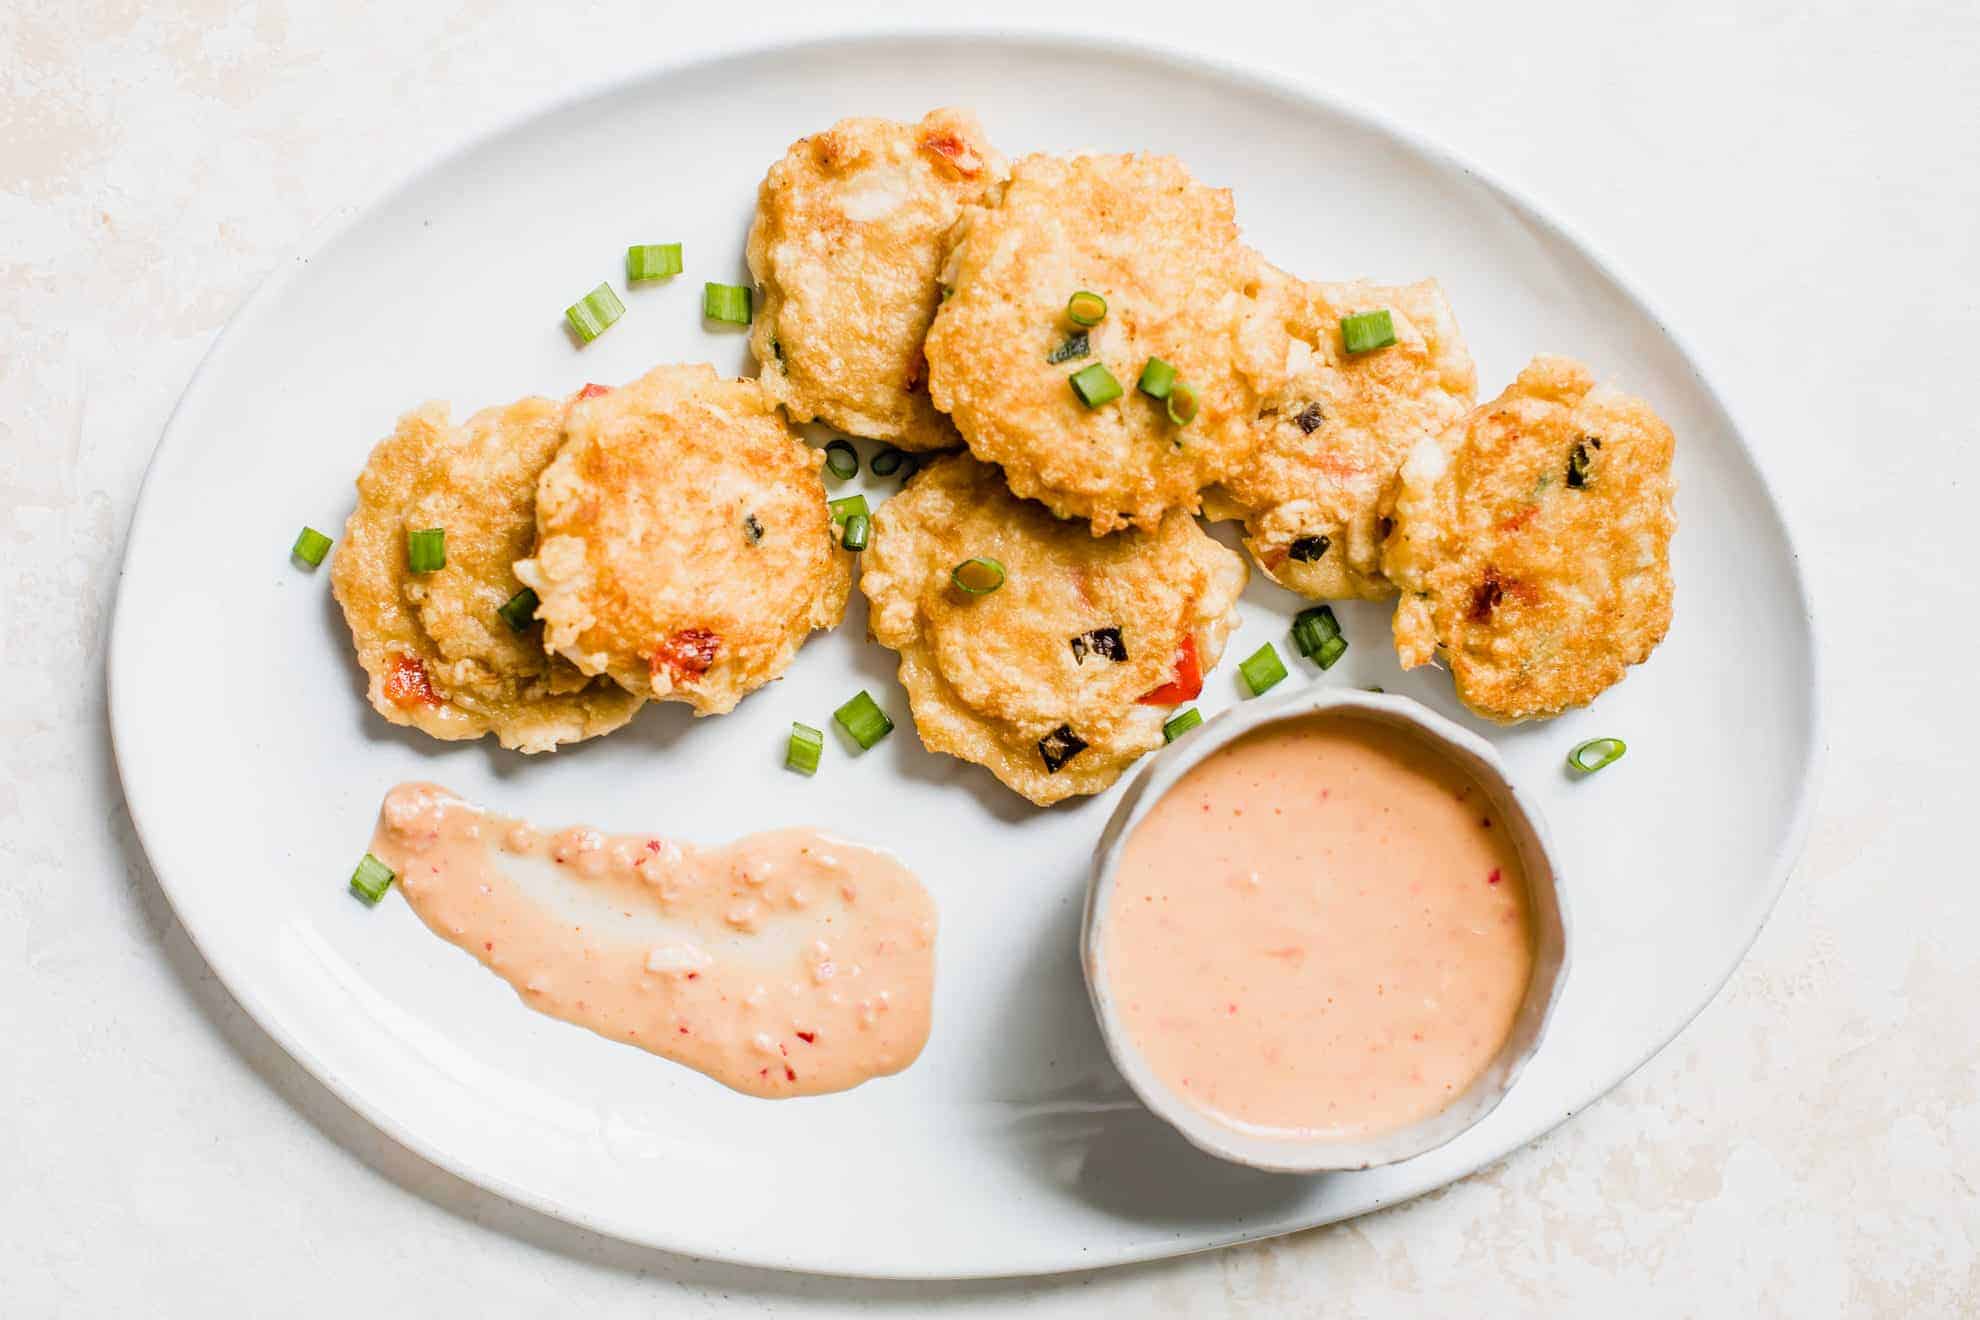 Pan-Fried Lump Crab Cakes + Spicy Remoulade